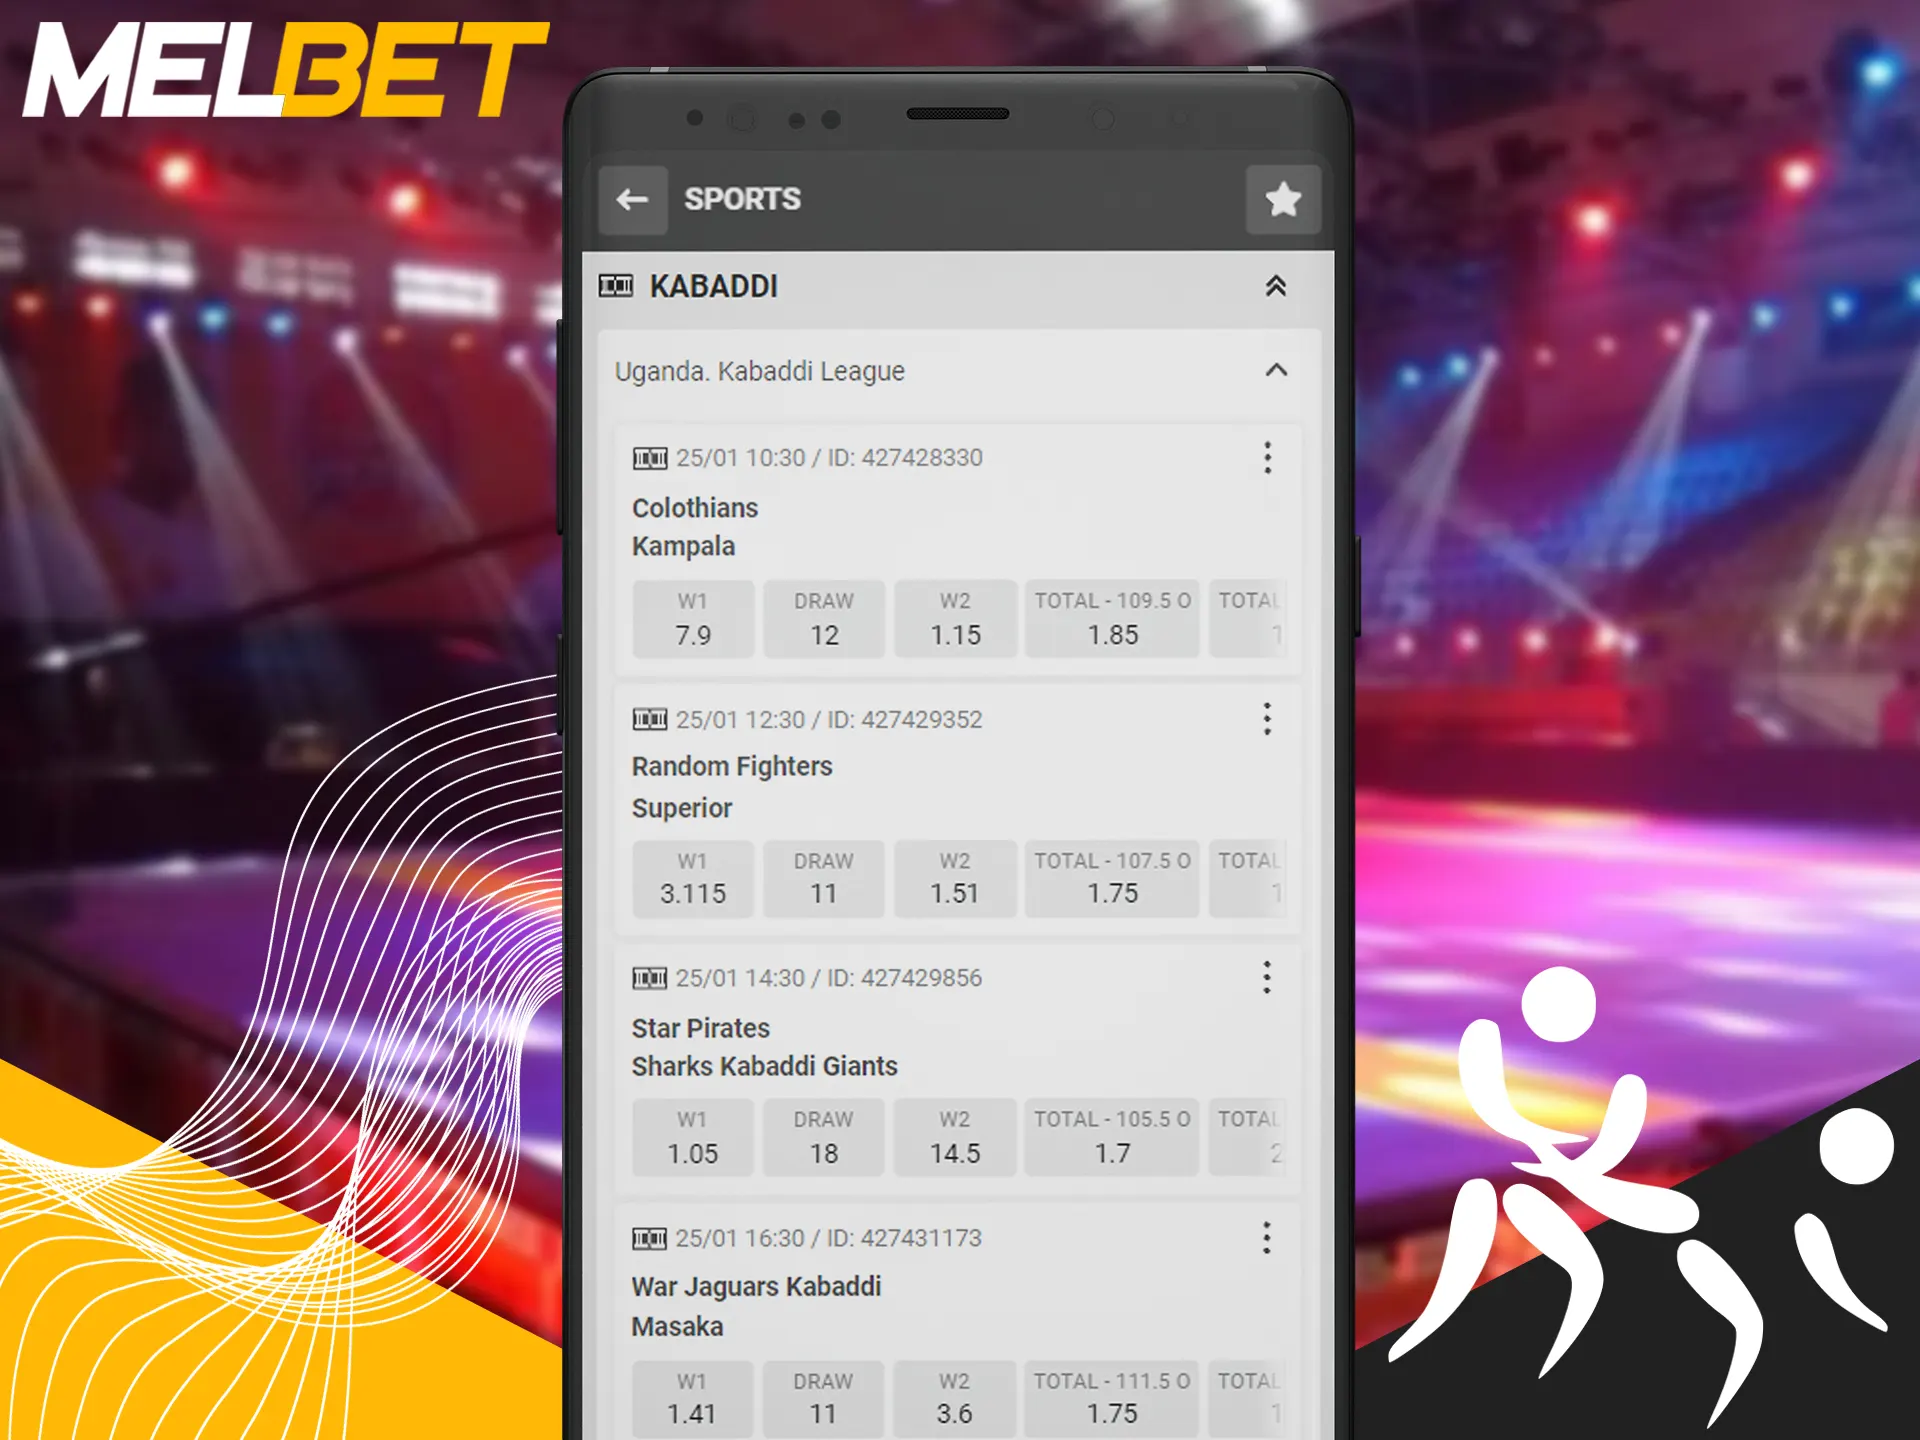 Make bets on the most interesting sport on Melbet.